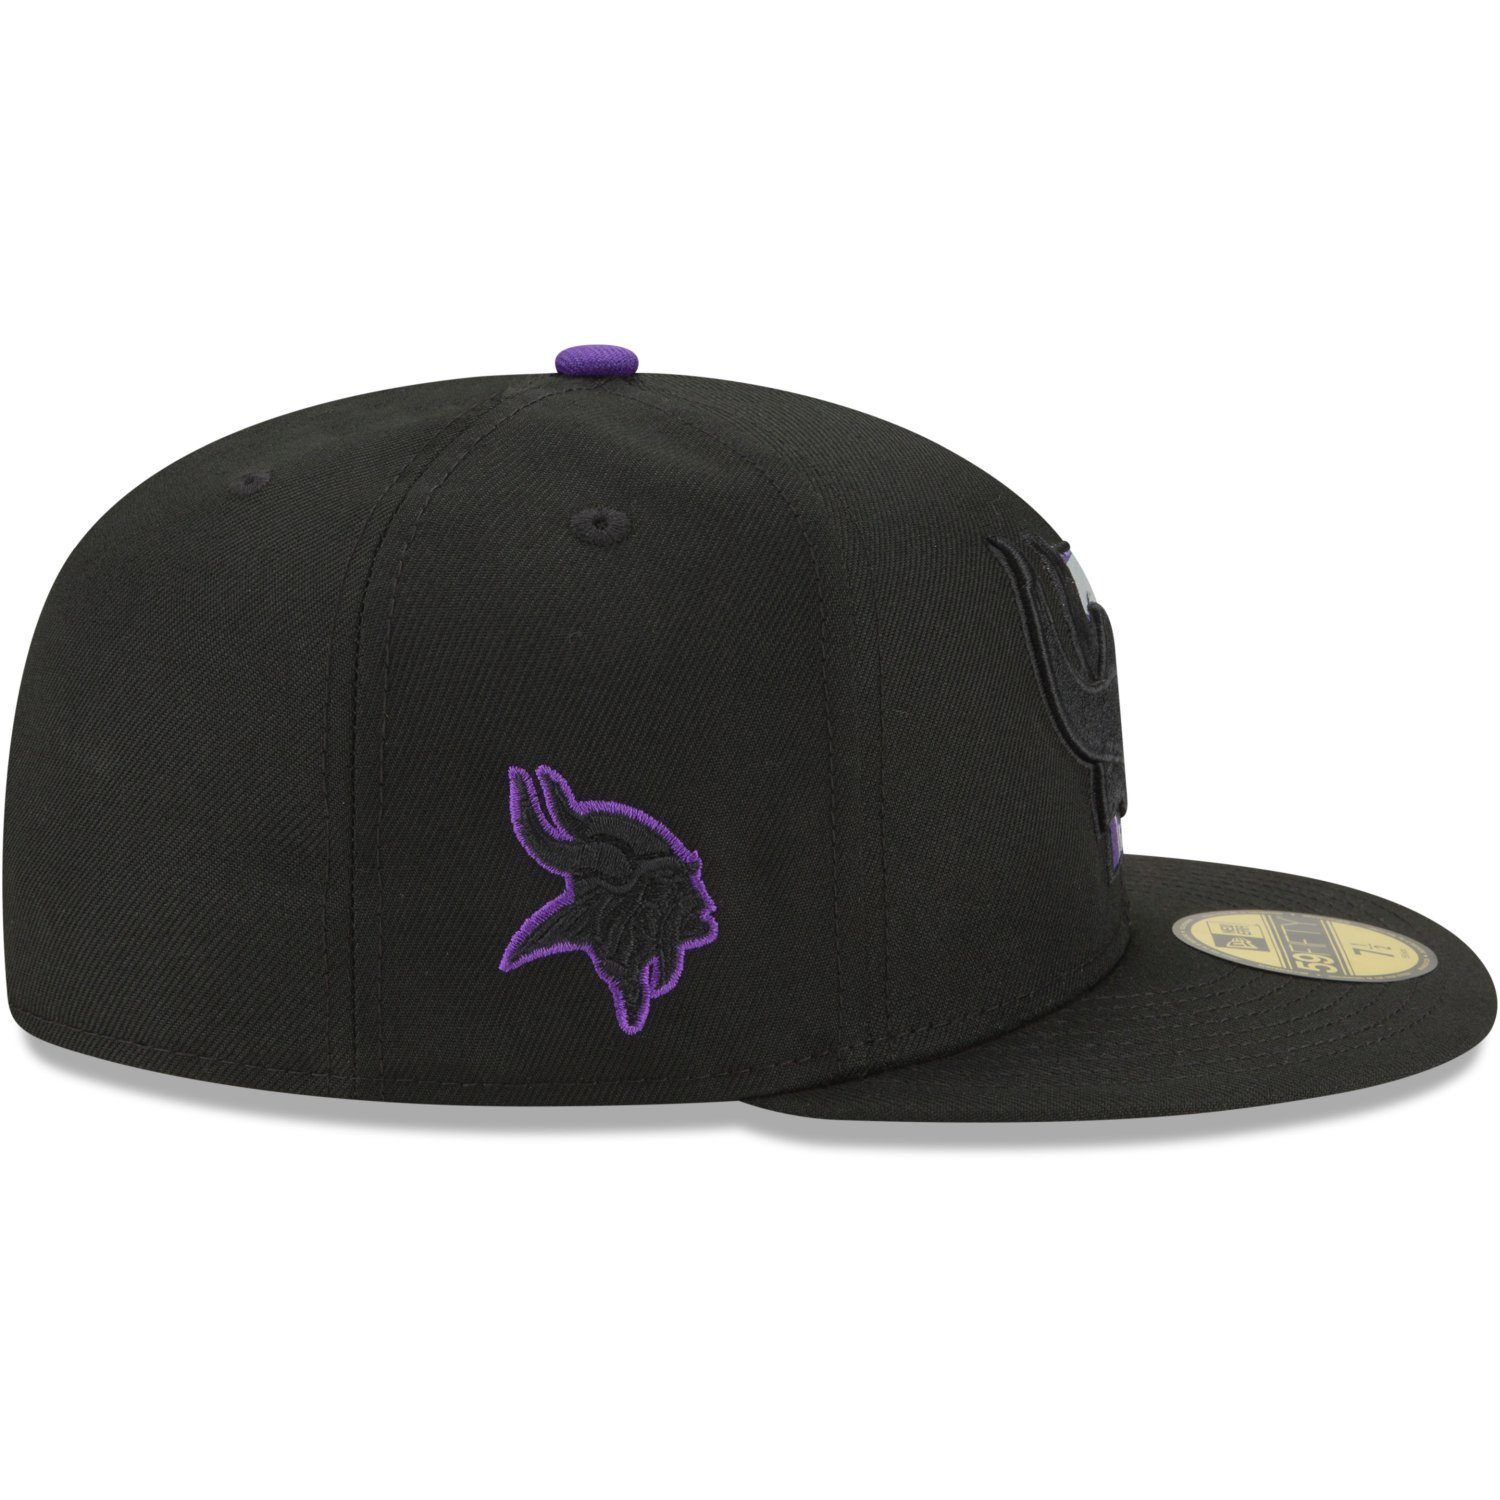 Era STATE NFL Minnesota Cap 59Fifty New LOGO Fitted Vikings Teams